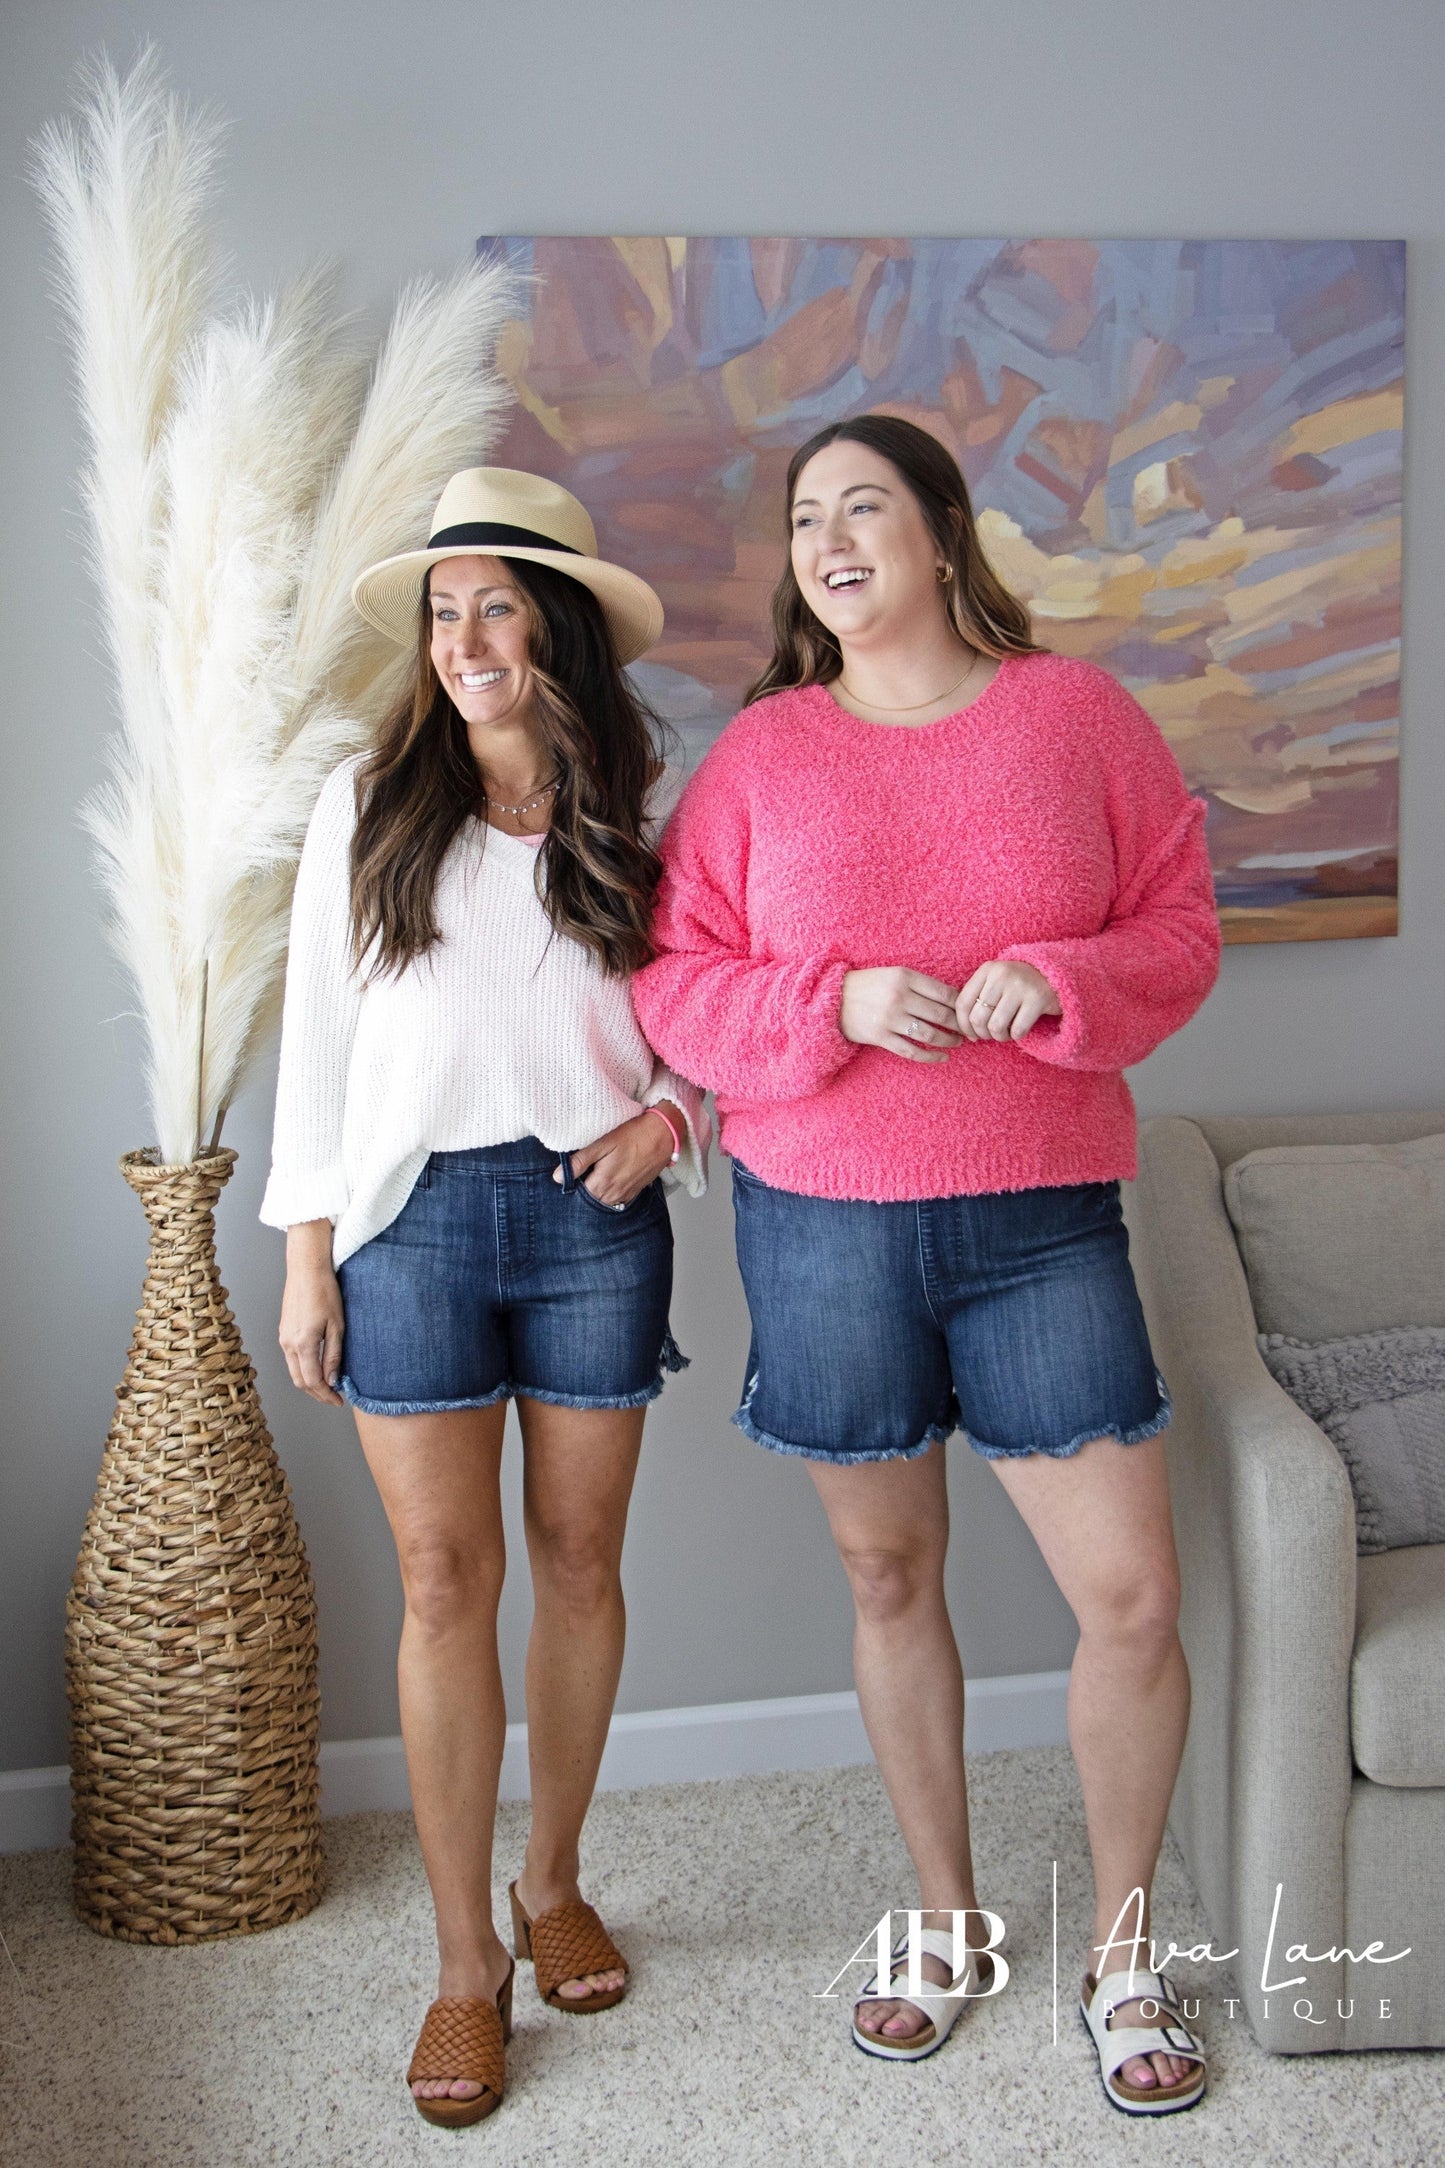 Judy Blue Remember This High-Rise Pull On Denim Shorts